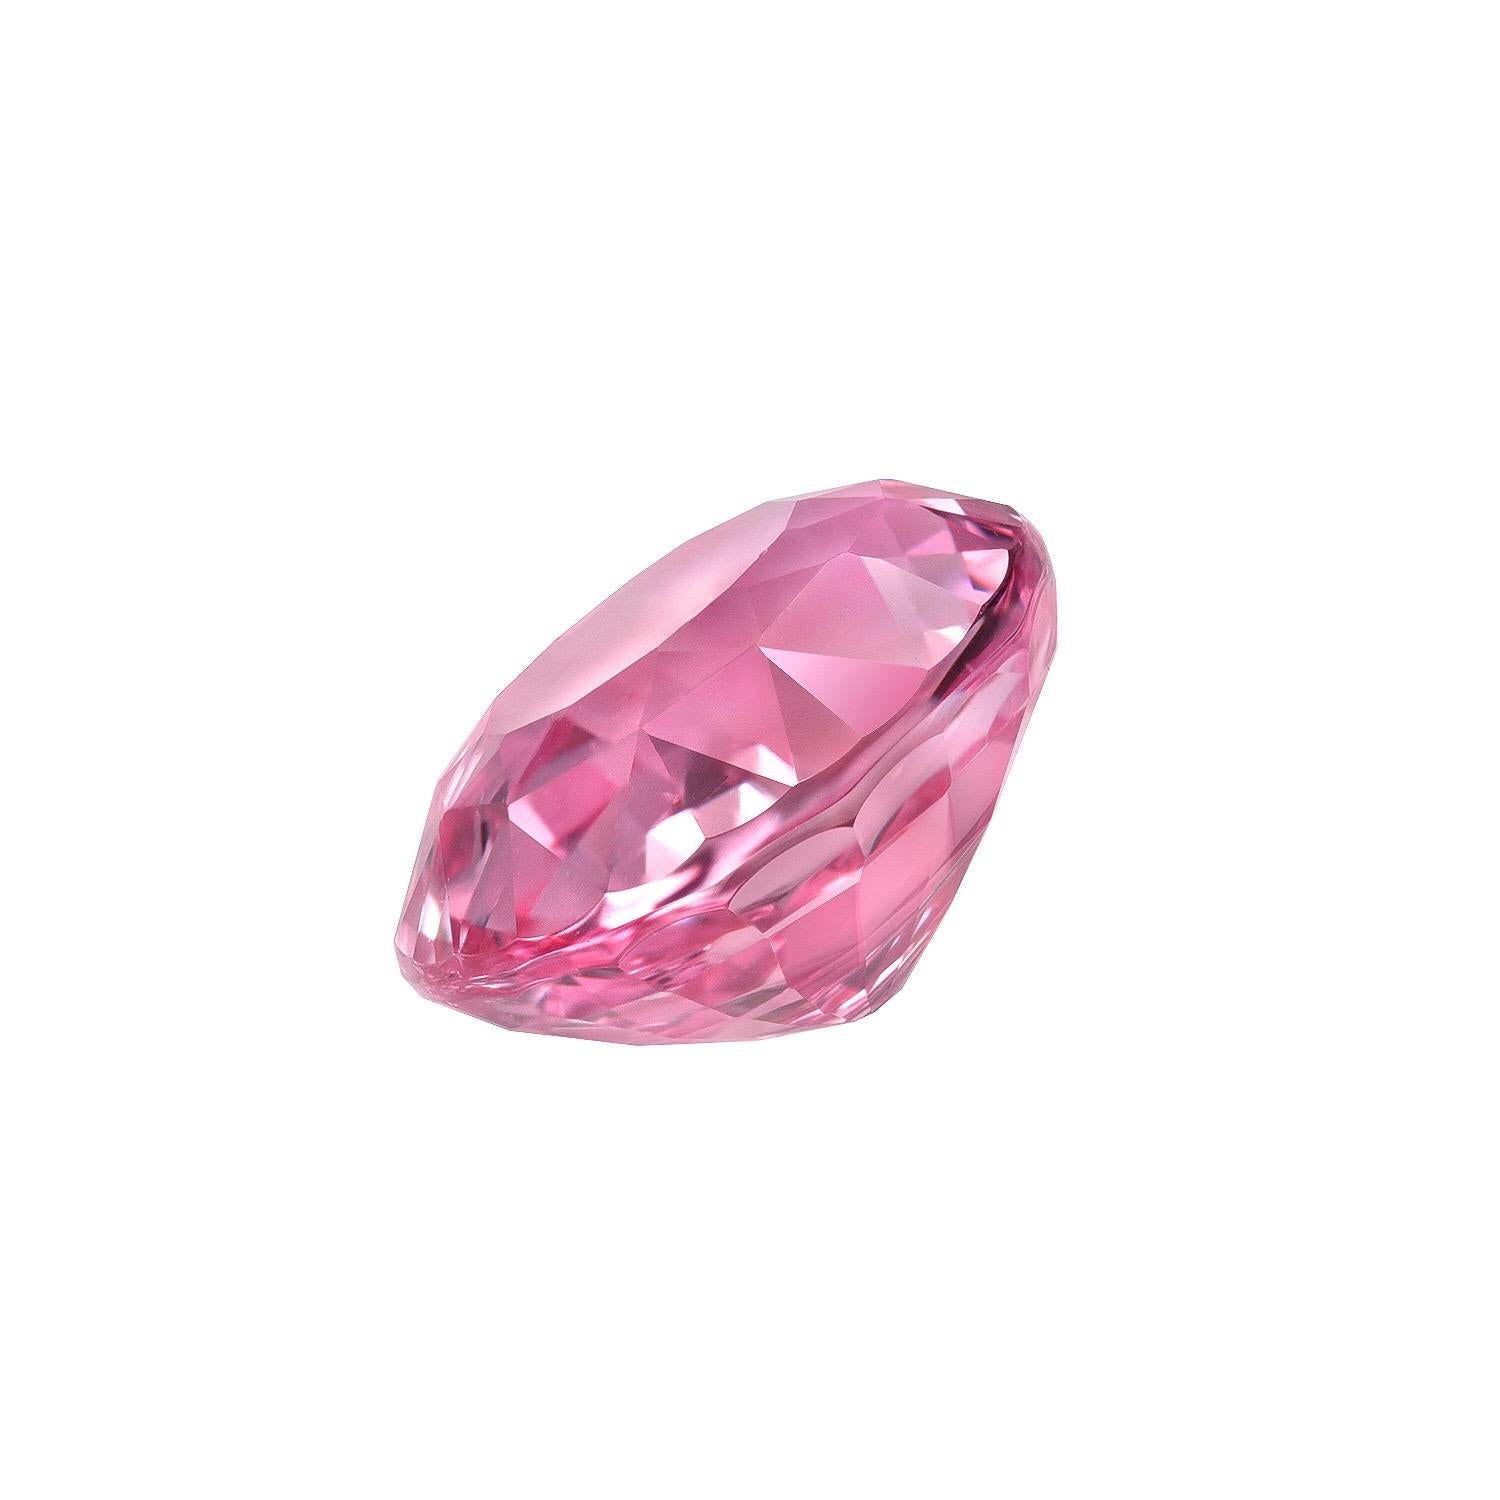 Exclusive 2.32 carat orangy pink Padparadscha Sapphire oval gem, offered loose to a world-class gemstone connoisseur.
The GIA certificate is attached to the image selection for your reference.
Returns are accepted and paid by us within 7 days of